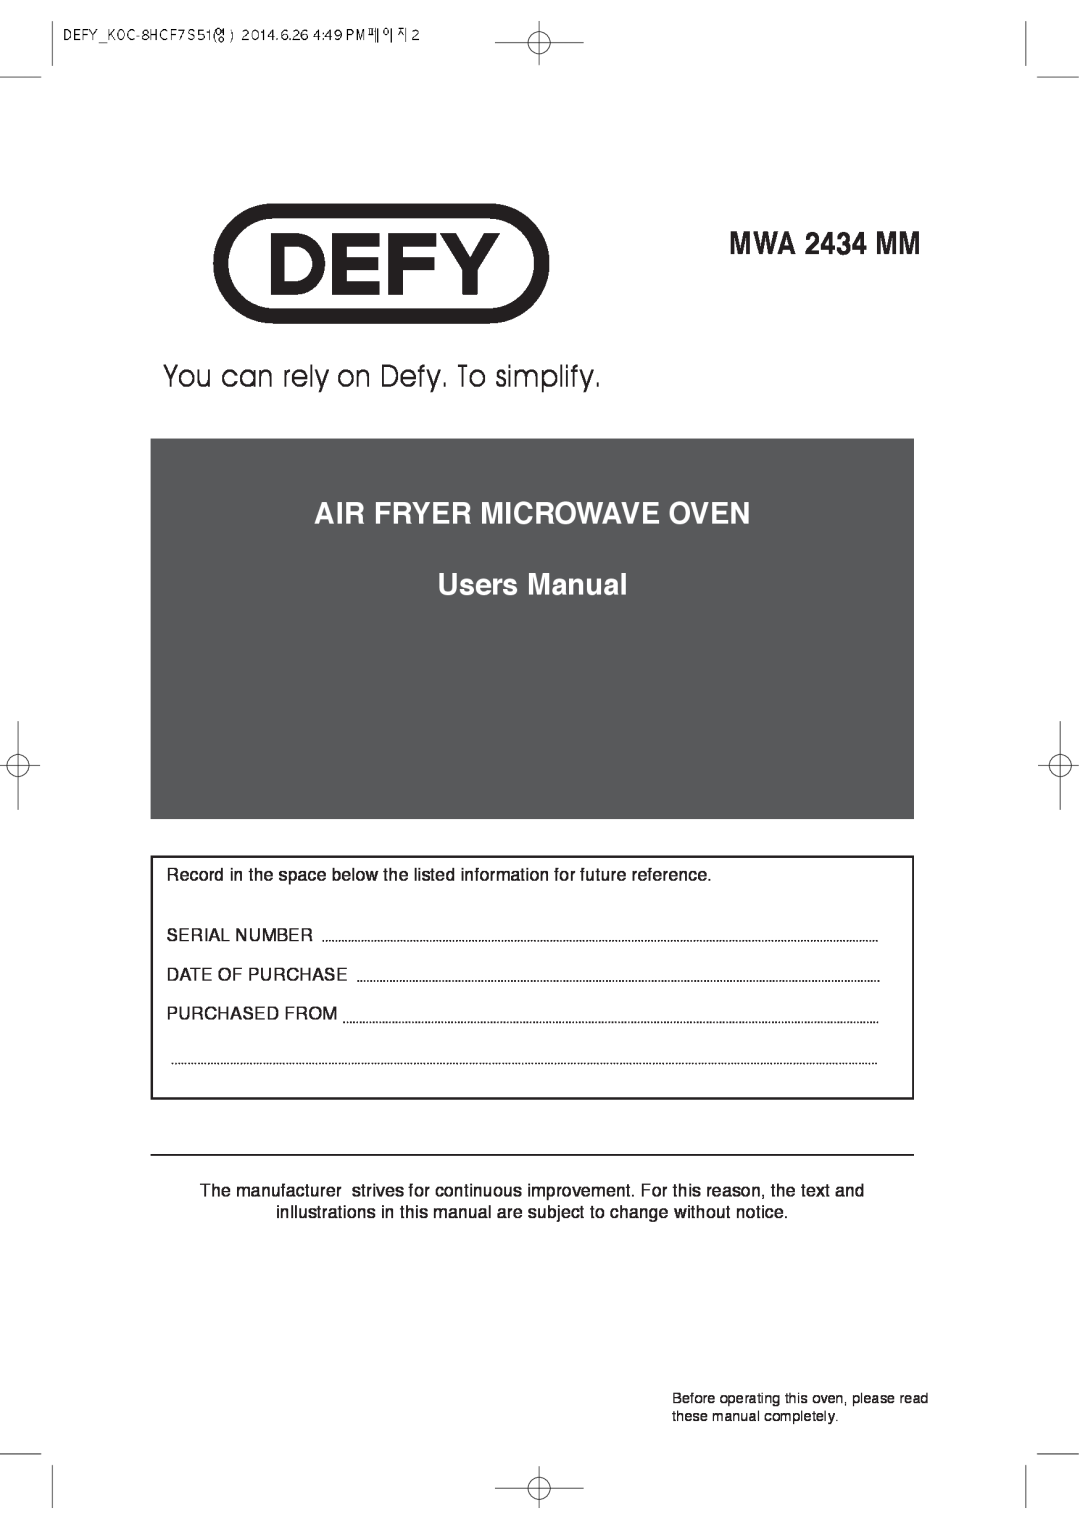 Defy Appliances MWA 2434 MM user manual You can rely on Defy. To simplify 